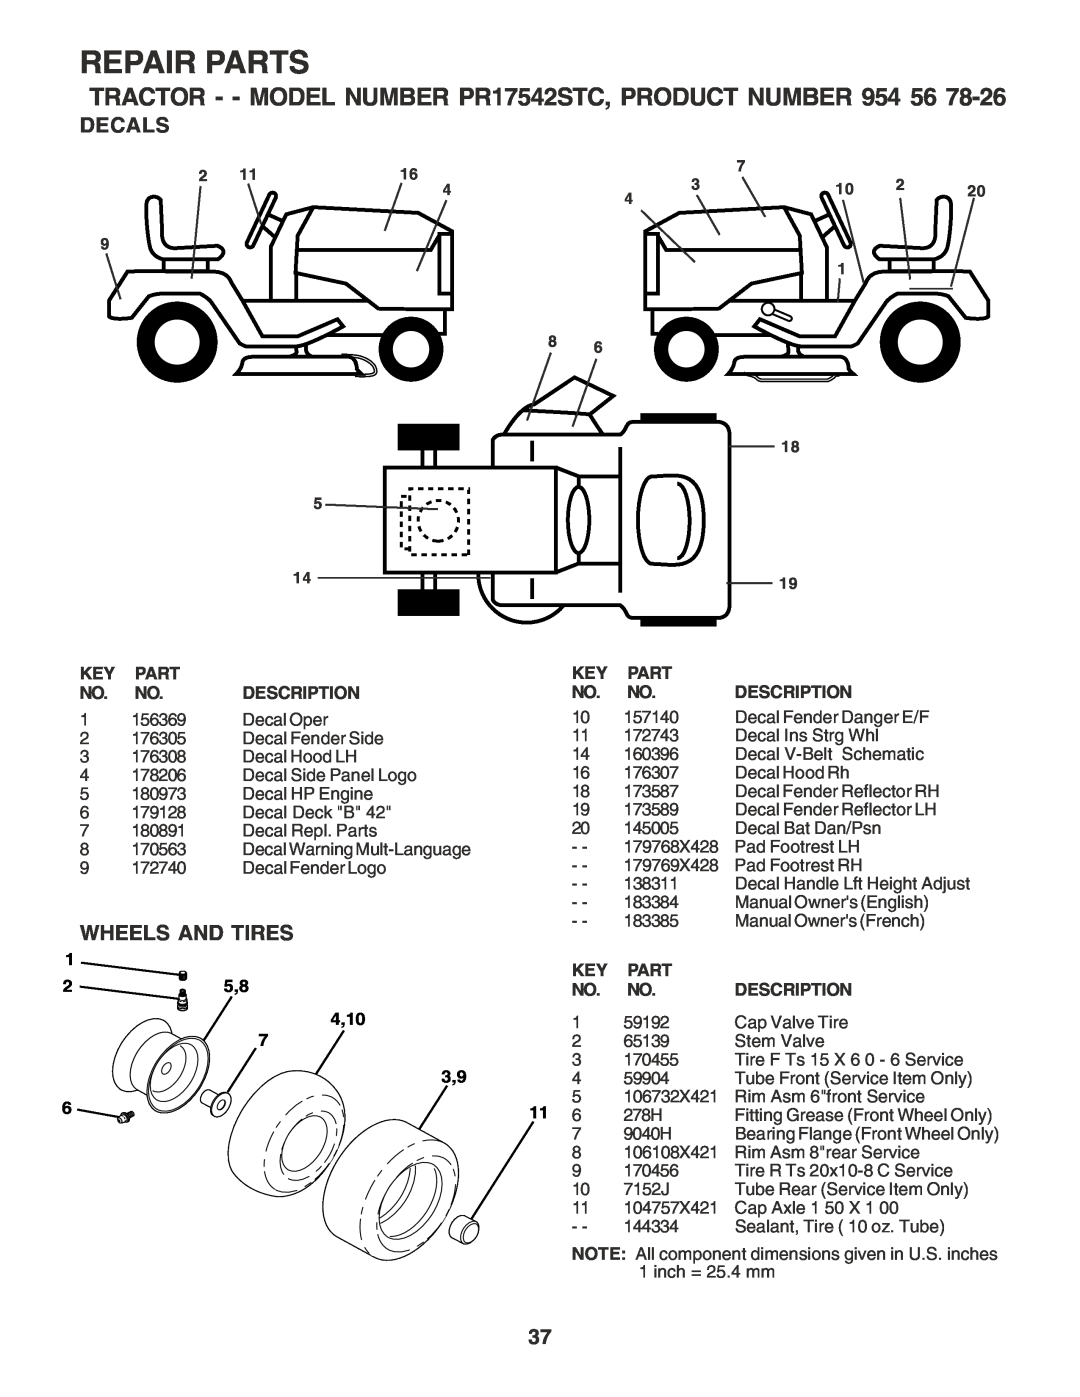 Poulan Decals, Wheels And Tires, Repair Parts, TRACTOR - - MODEL NUMBER PR17542STC, PRODUCT NUMBER, Description, 4,10 